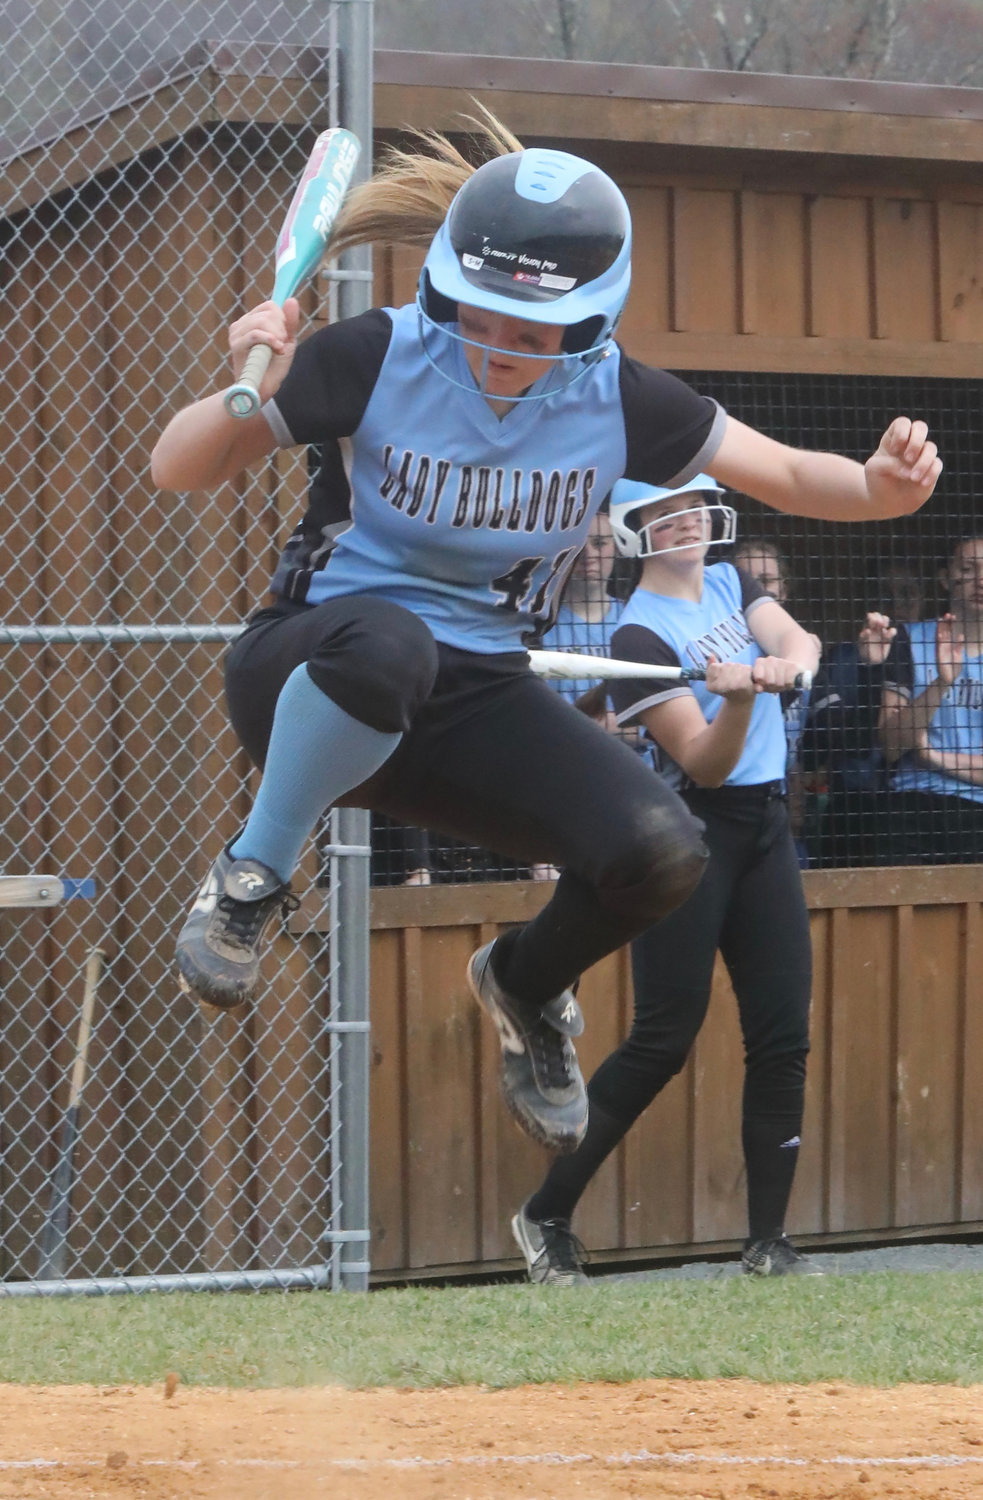 Sullivan West sophomore Elizabeth Reeves uses her quick reflexes to avoid a bouncing pitch in the first inning.